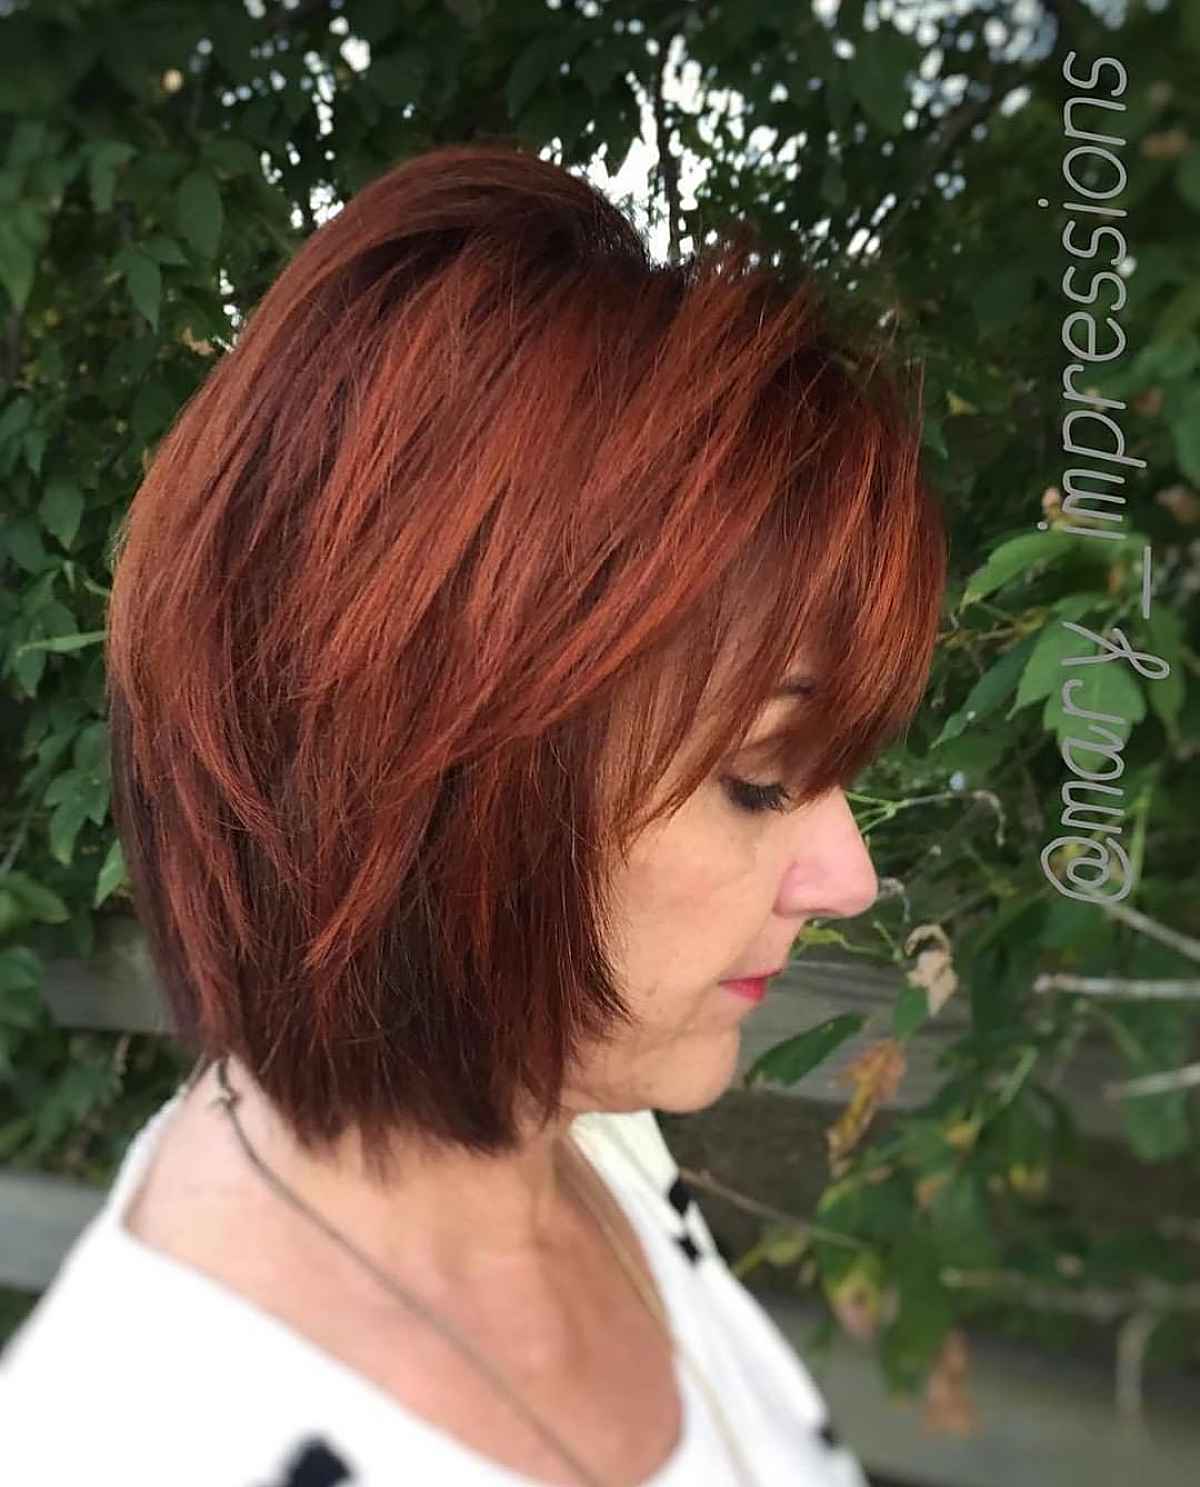 15 Trendiest Fall Haircut Ideas for Women Over 60 in 2021